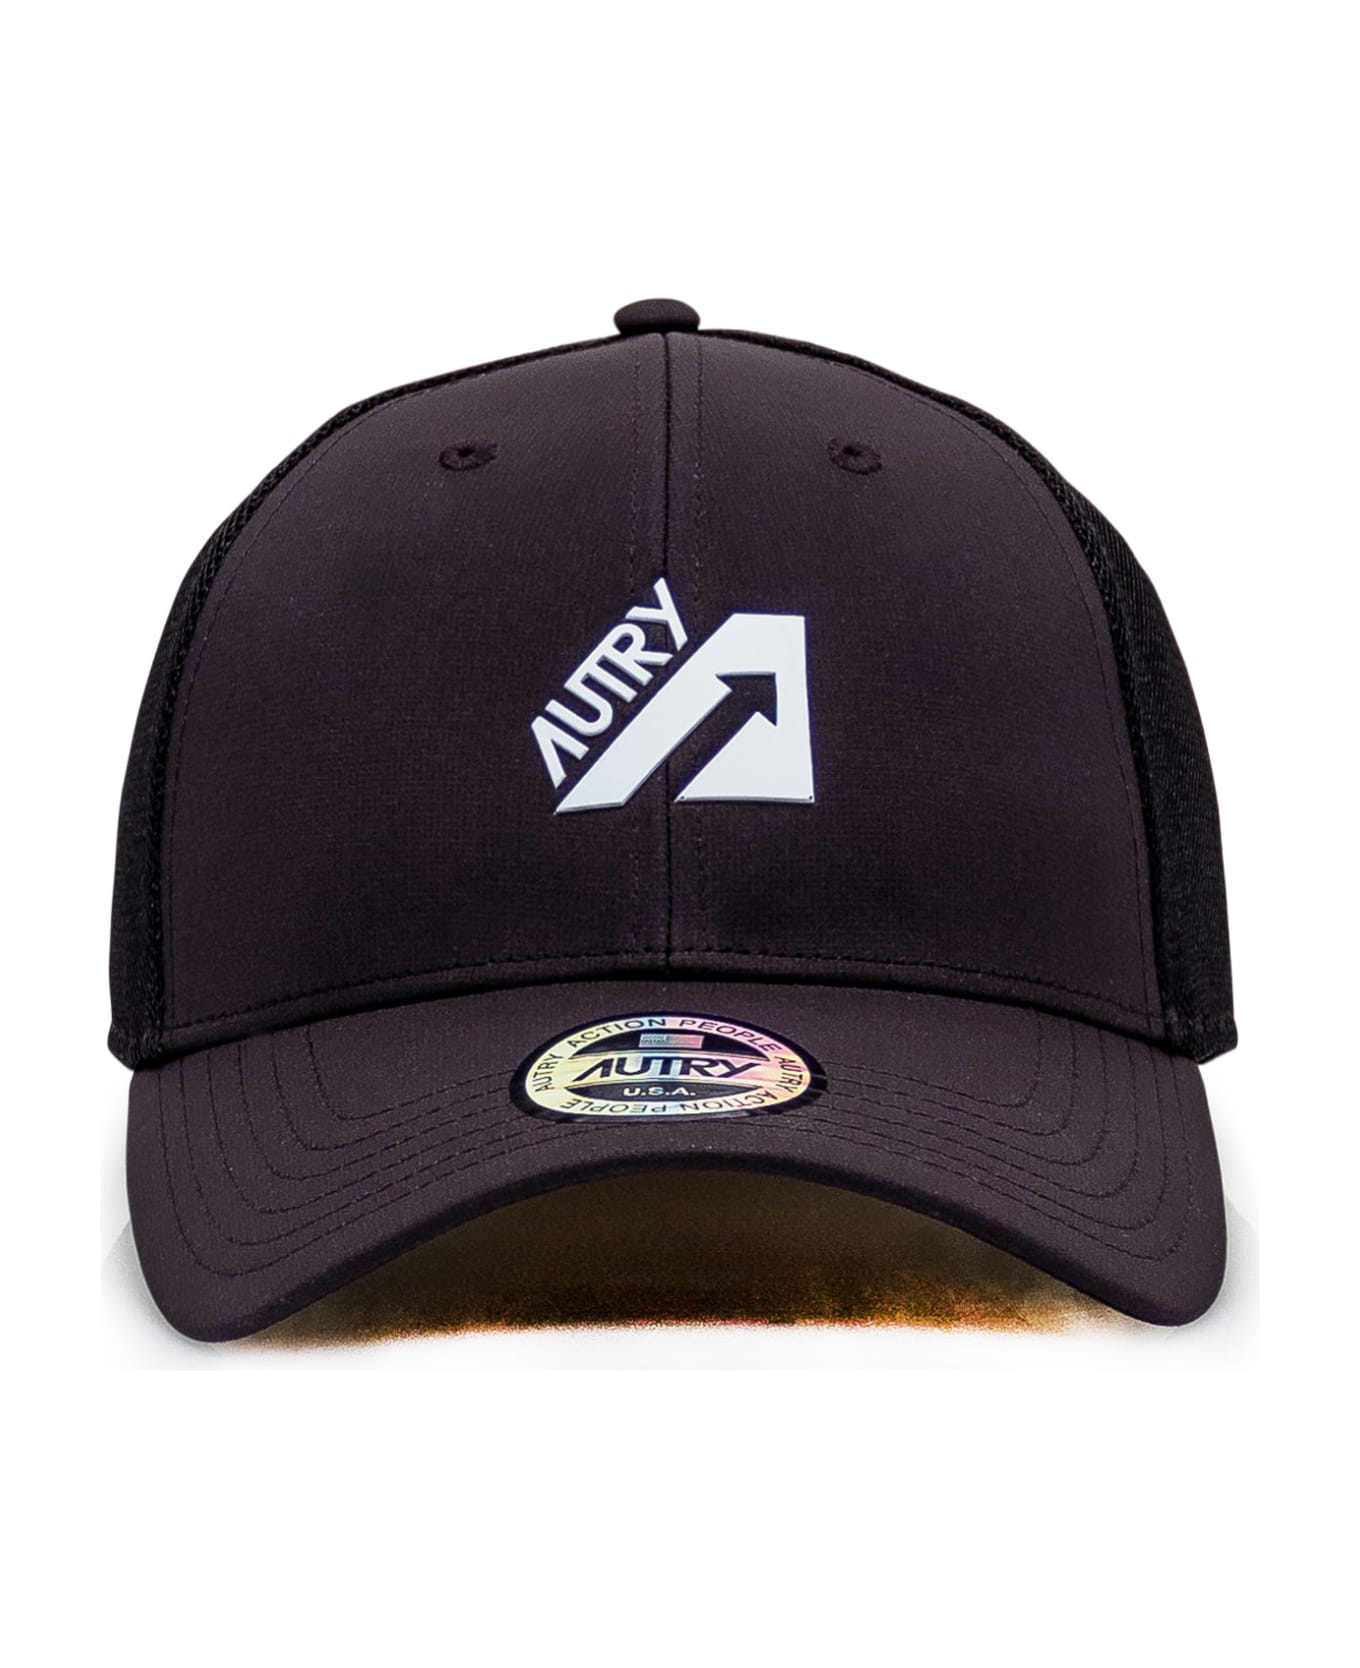 Autry Hat With Logo - Black